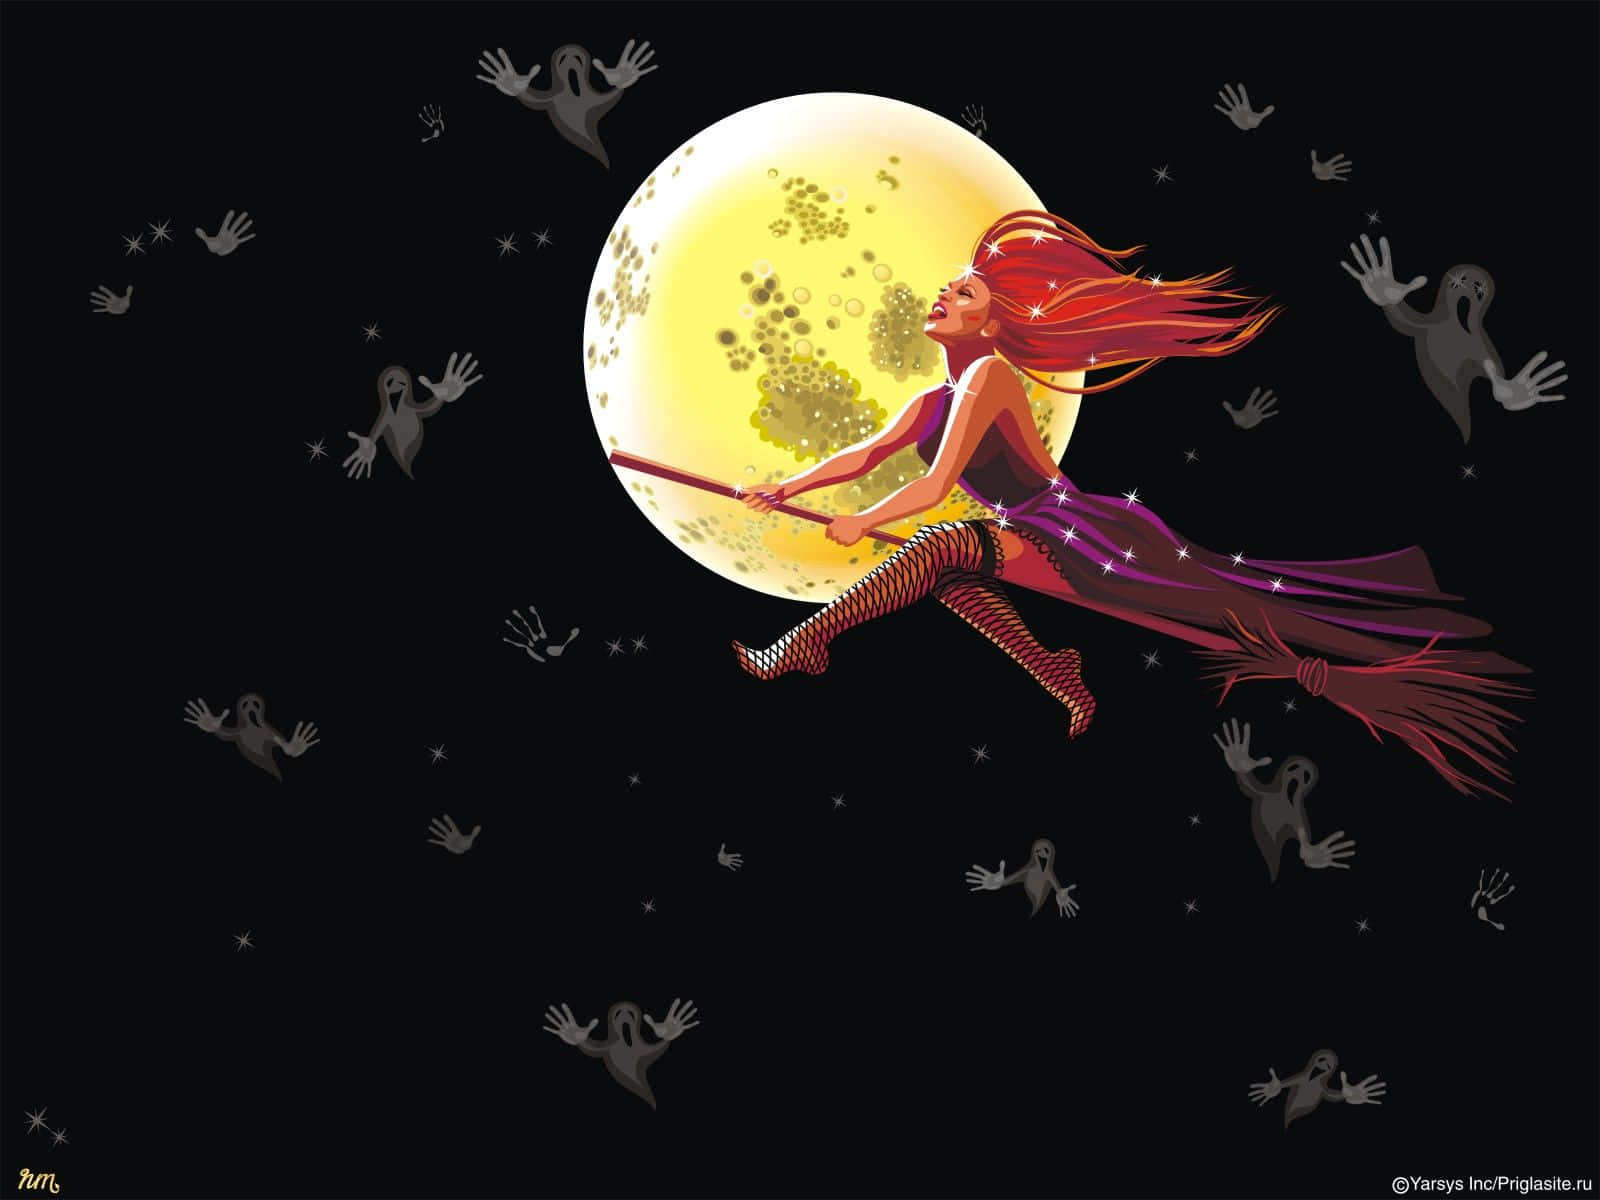 She's brought a spell of magic to Halloween night. Wallpaper